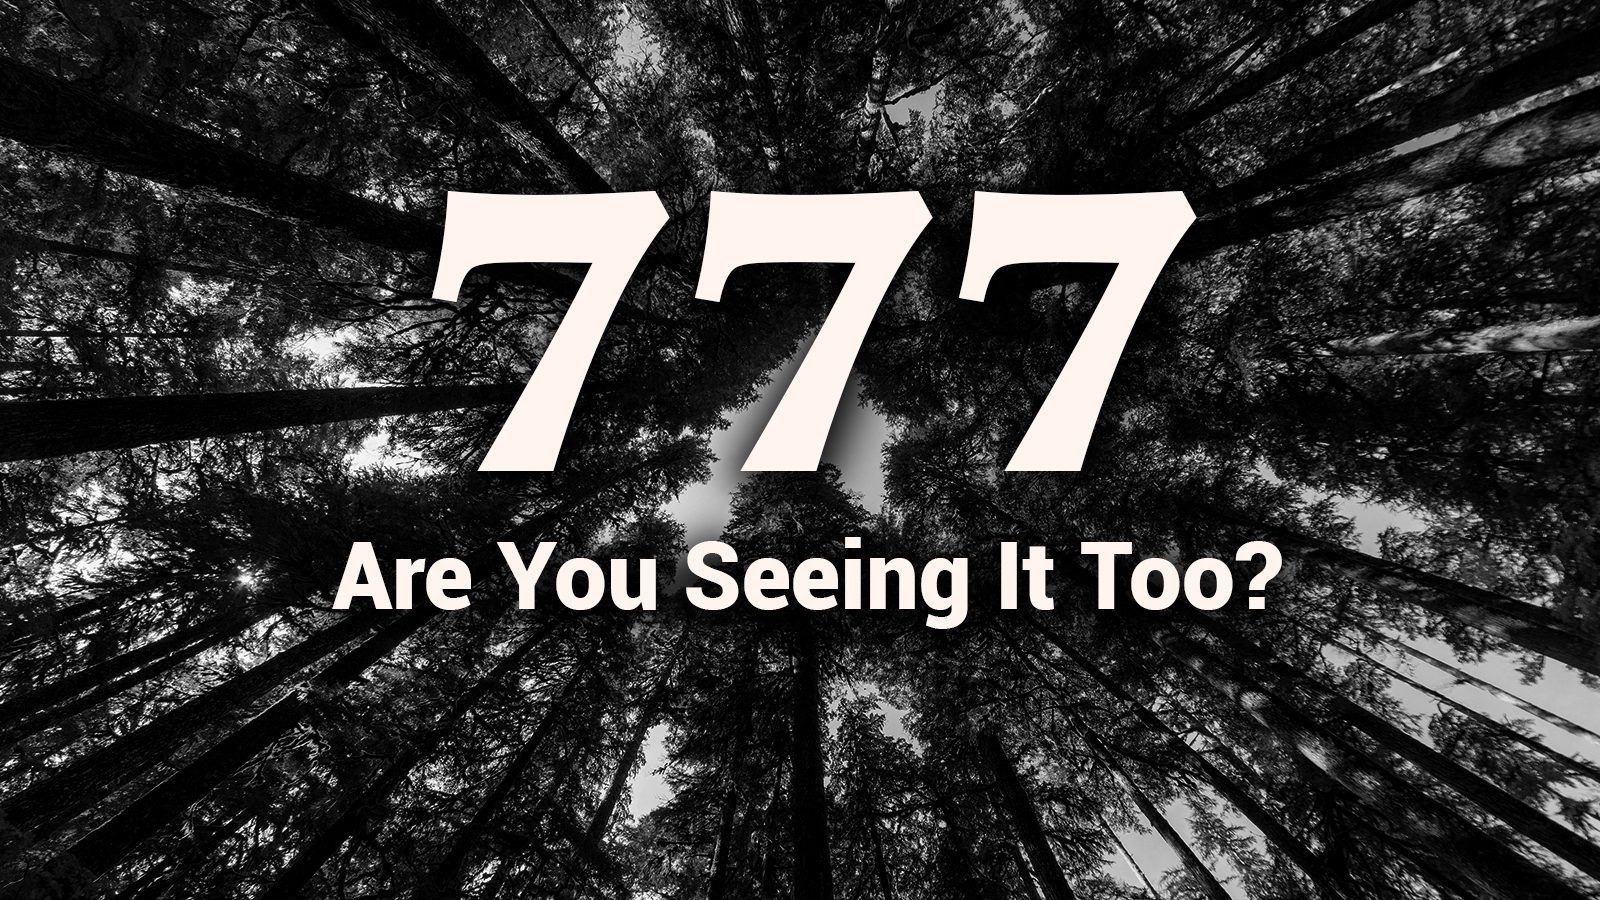 777: Are You Seeing It Too?